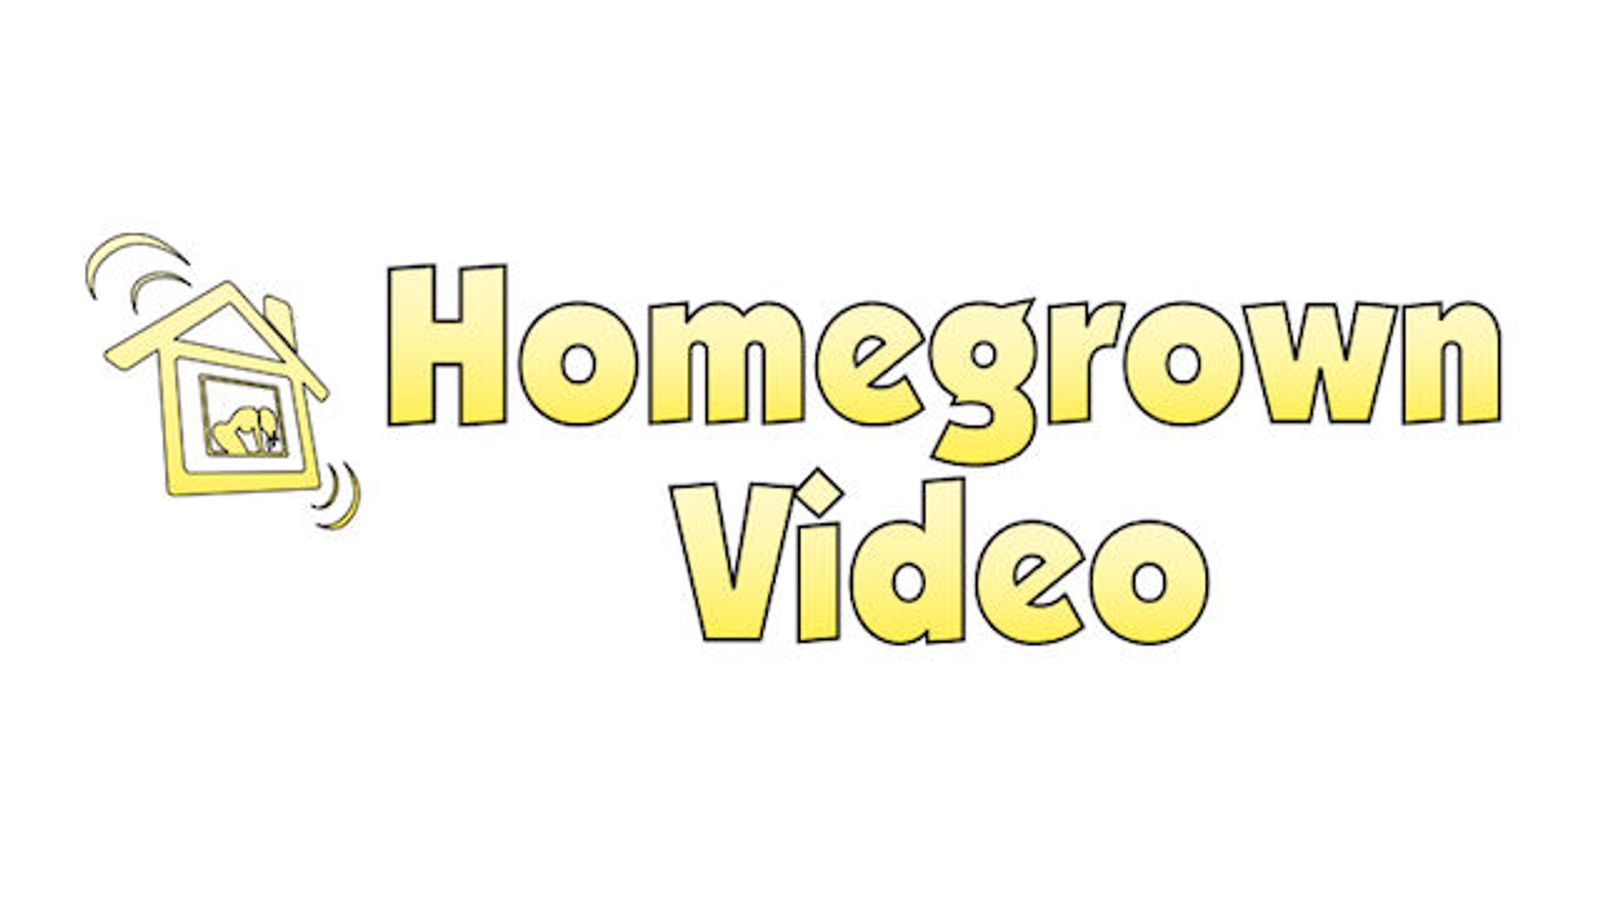 Homegrown Video Returns to Exhibit at Adult Entertainment Expo